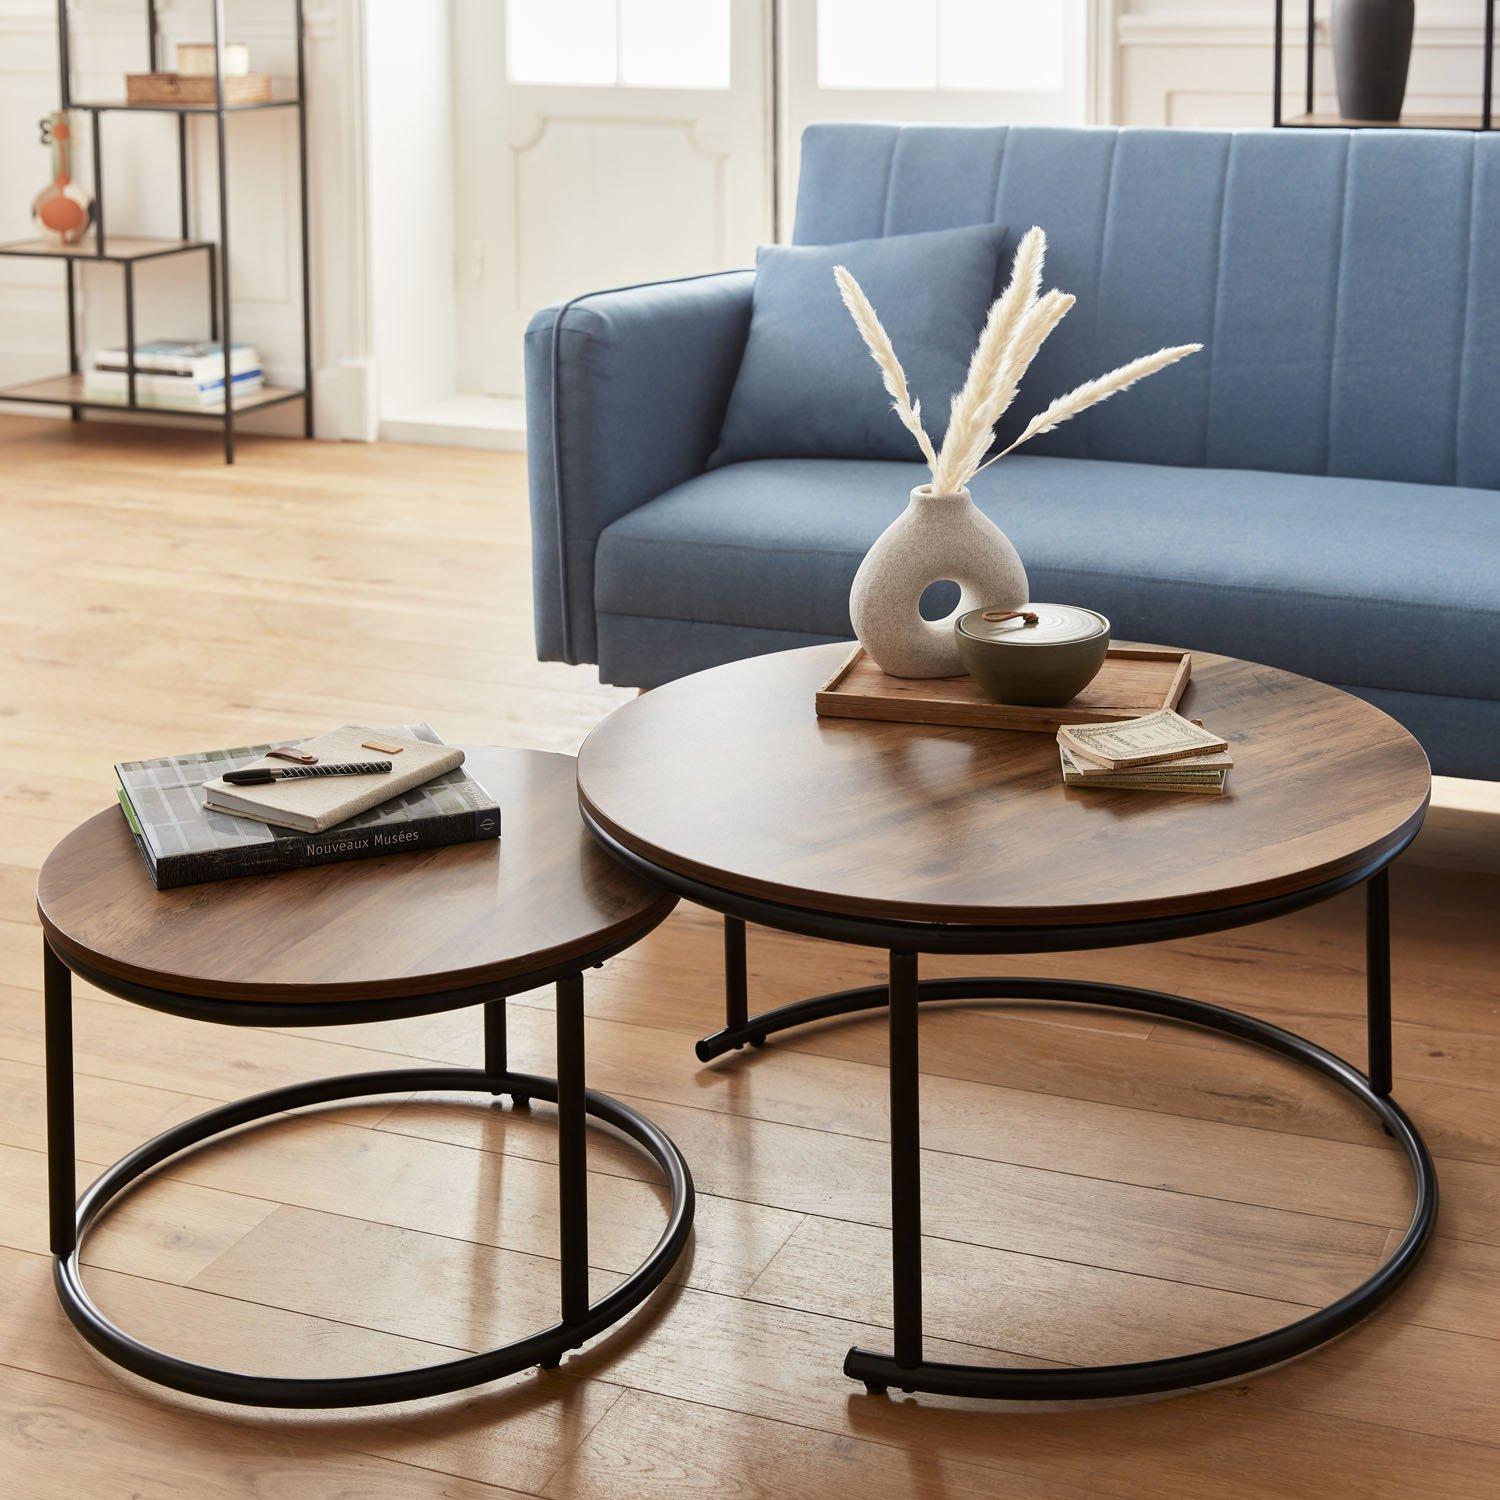 Pair Of Round Metal And Wood-effect Nesting Coffee Tables